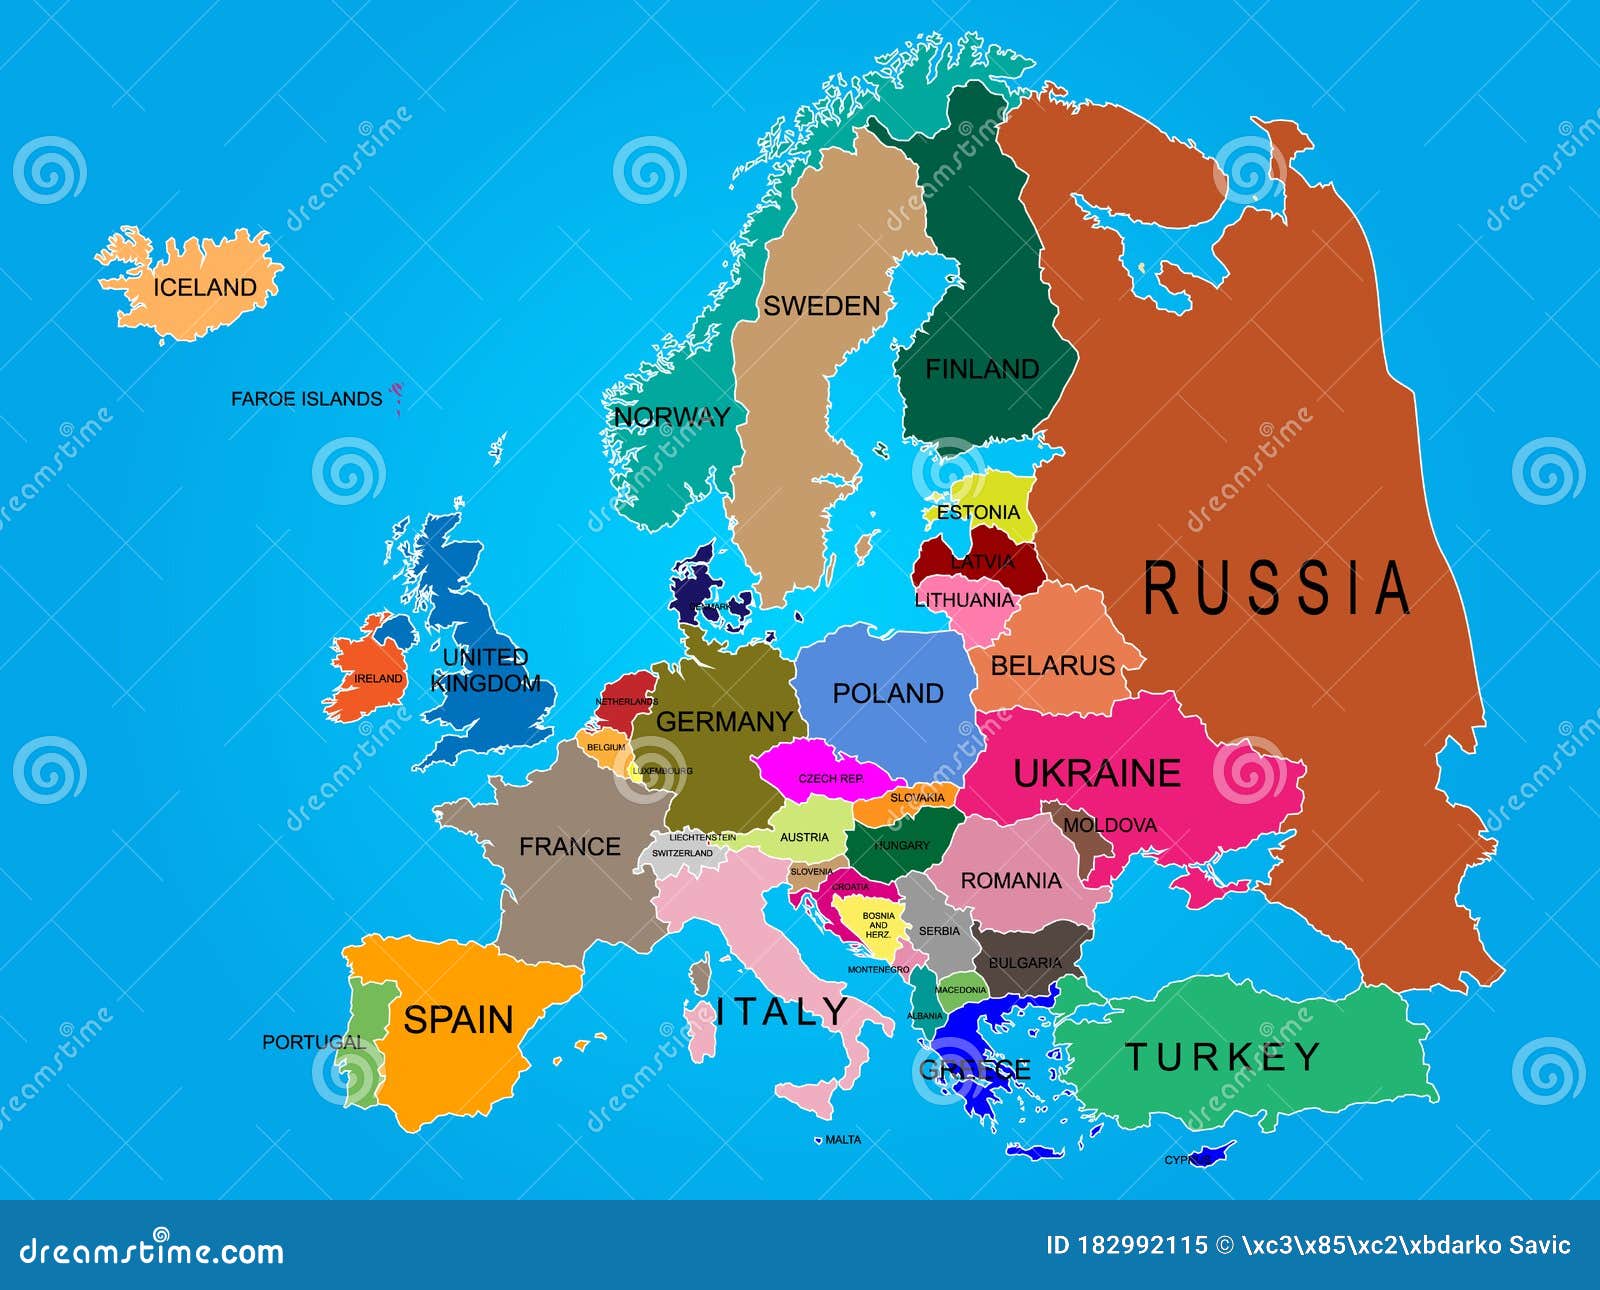 map of europe countries